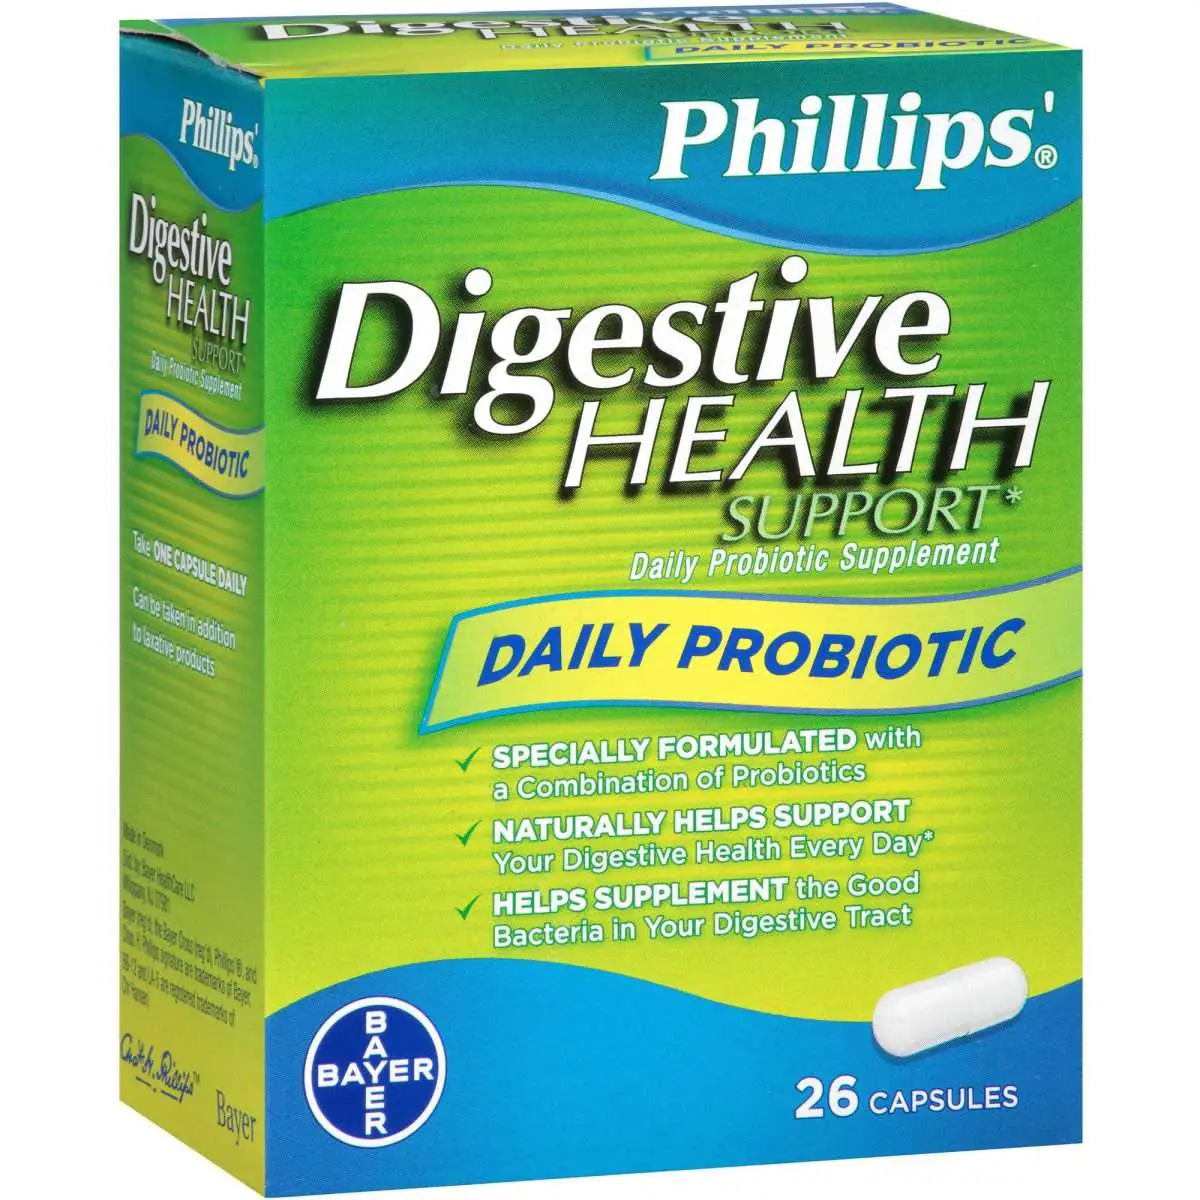 Phillips Digestive Health Daily Probiotic Capsules, 26 Ct